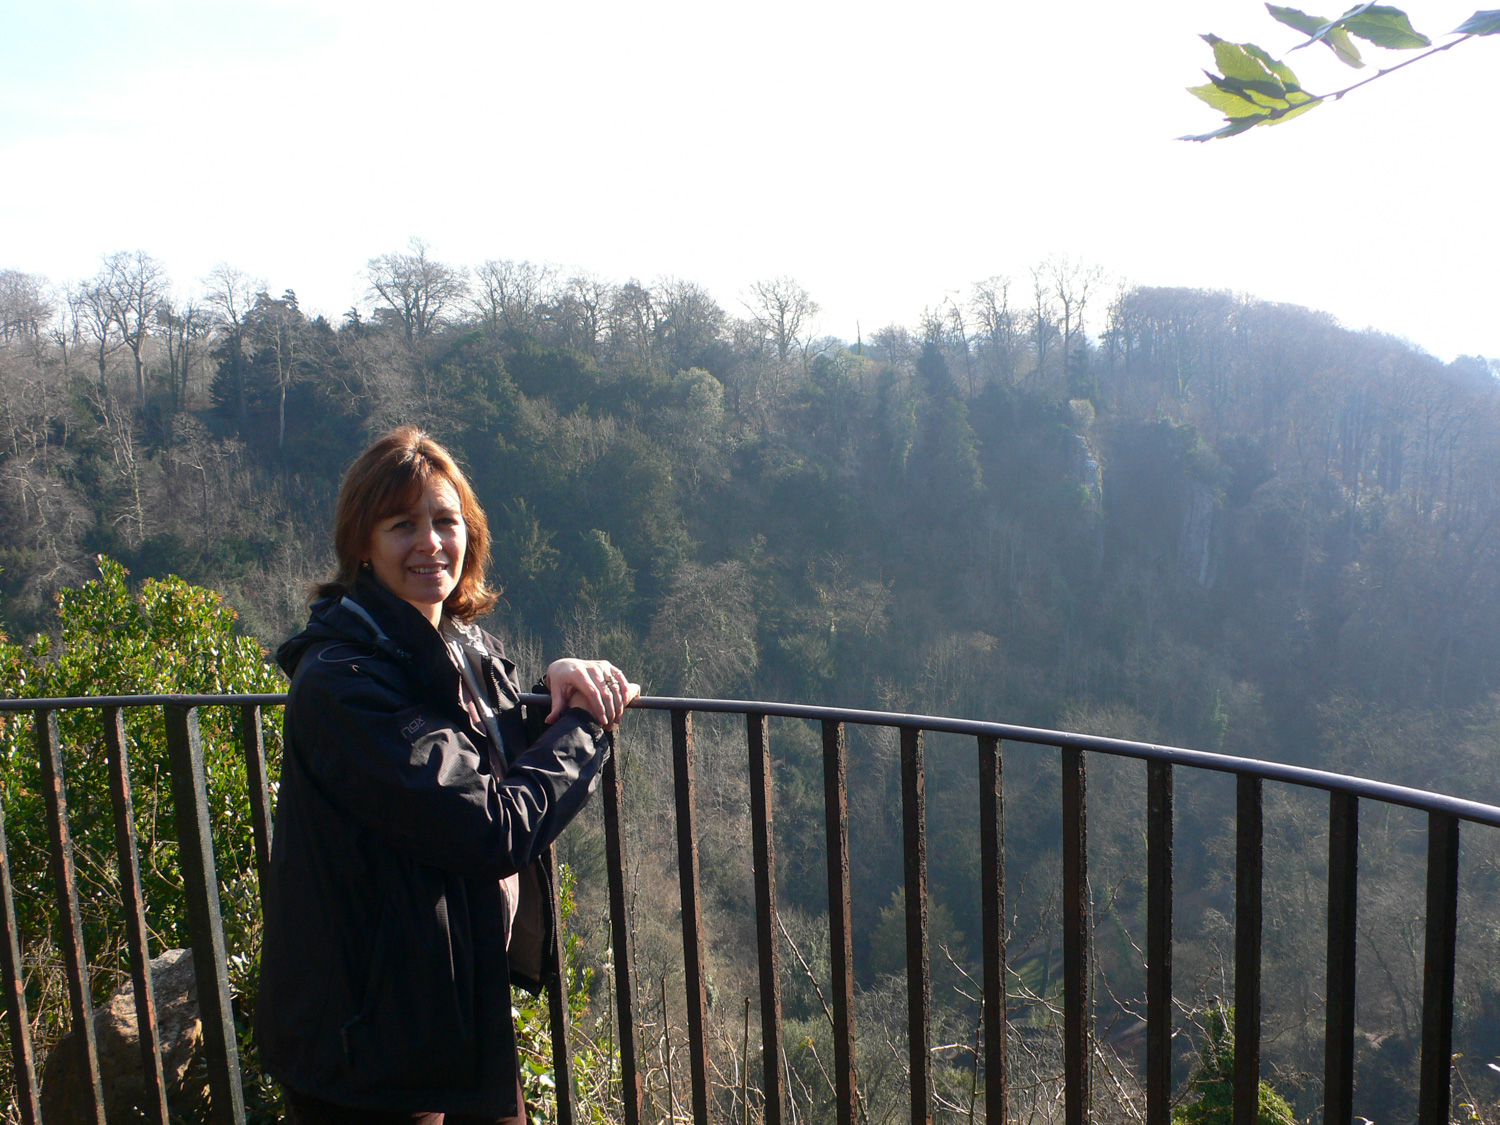 Overlooking the coombe dingle gorge in Blaize castle park